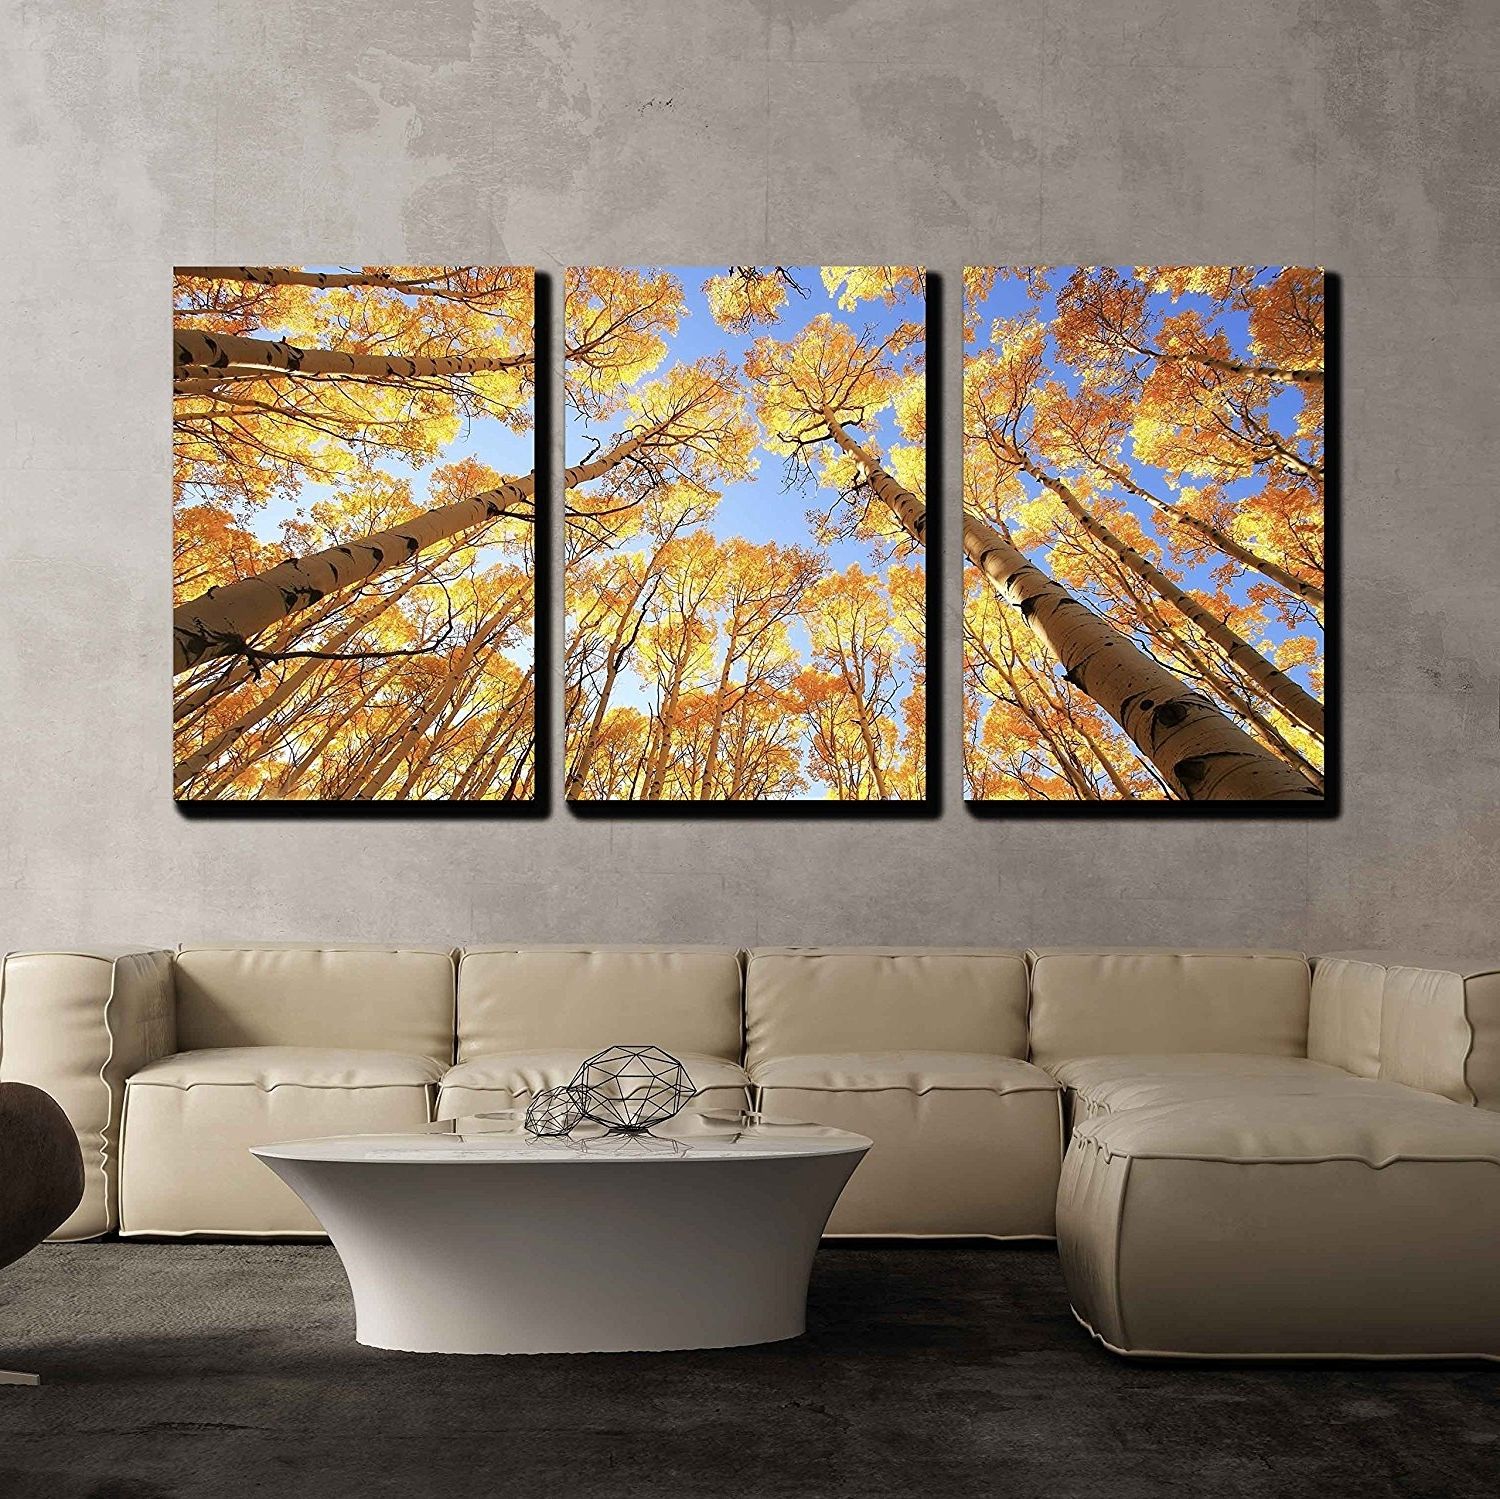 15 Best Collection of Aspen Tree Wall Art